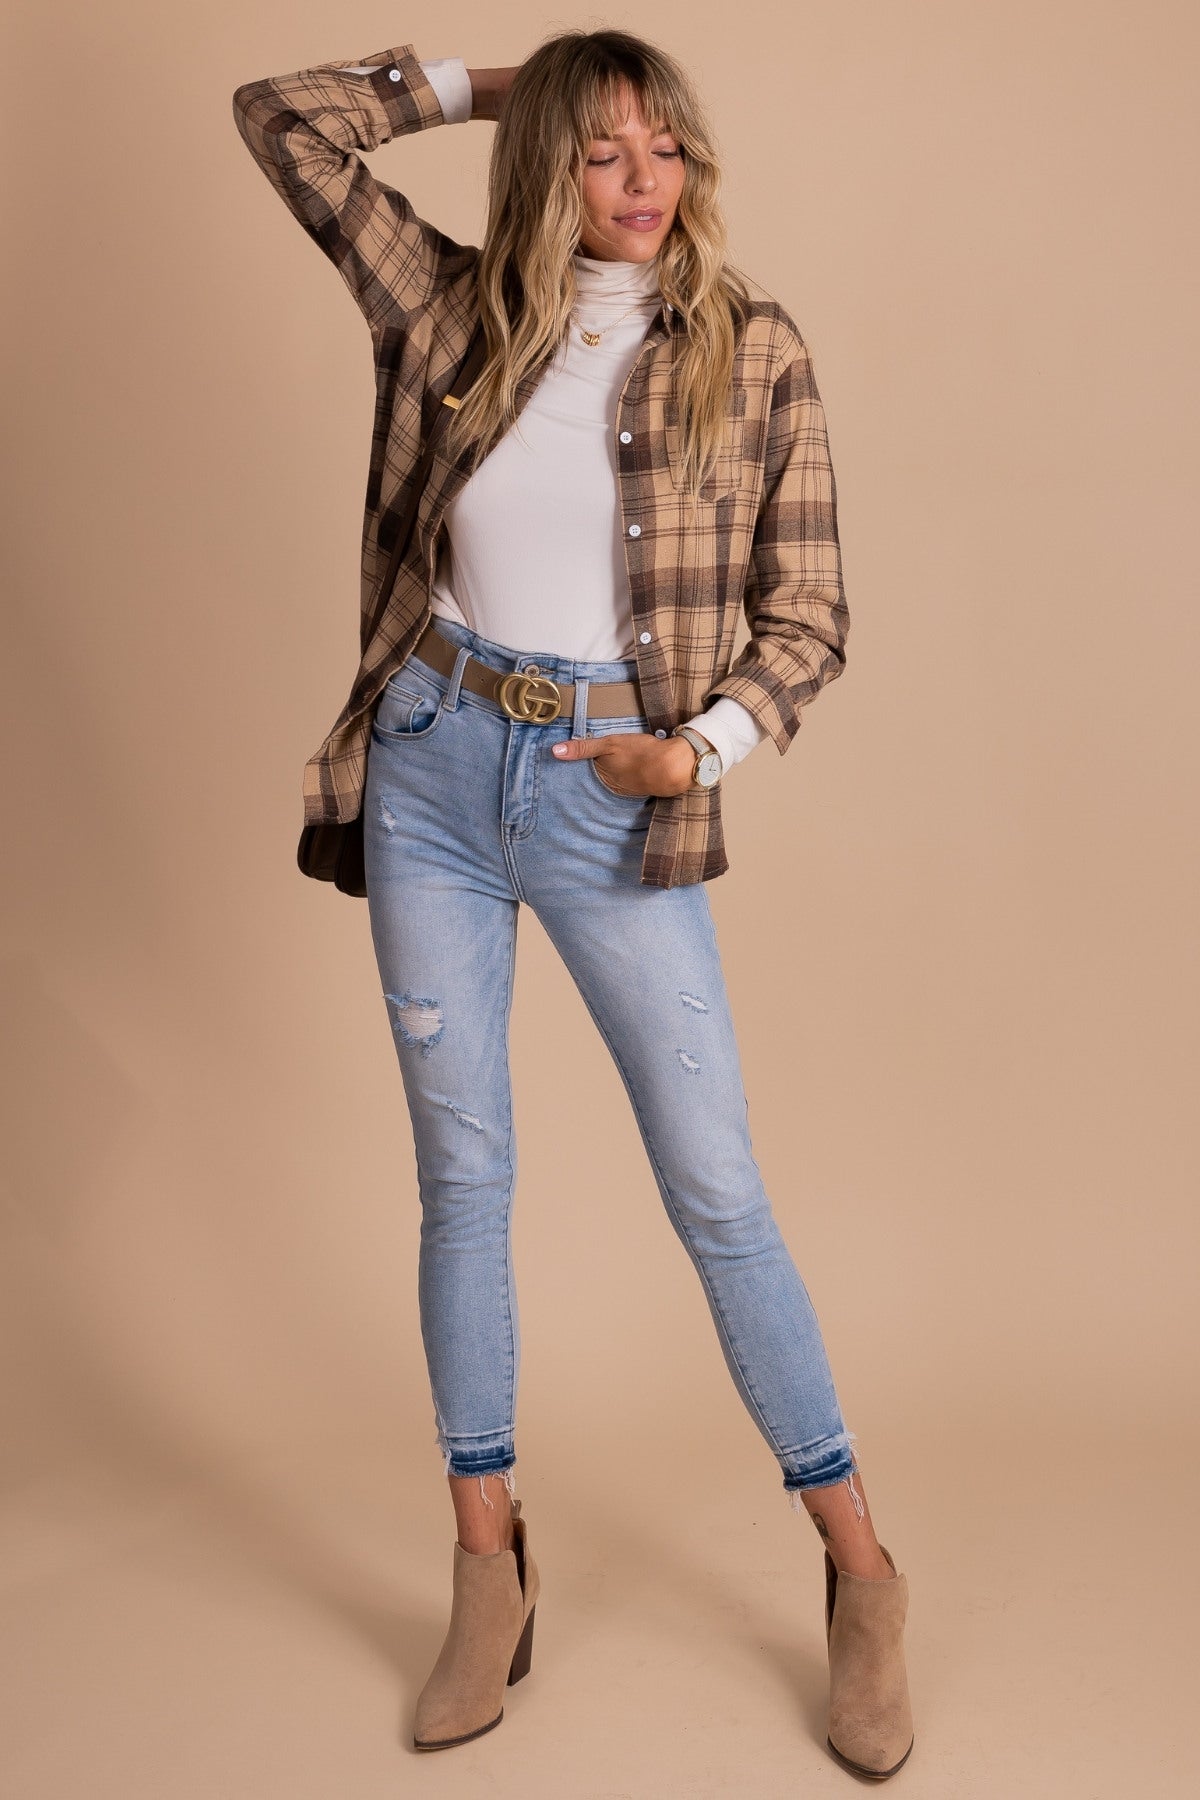 Fall outfits with brown plaid shirt